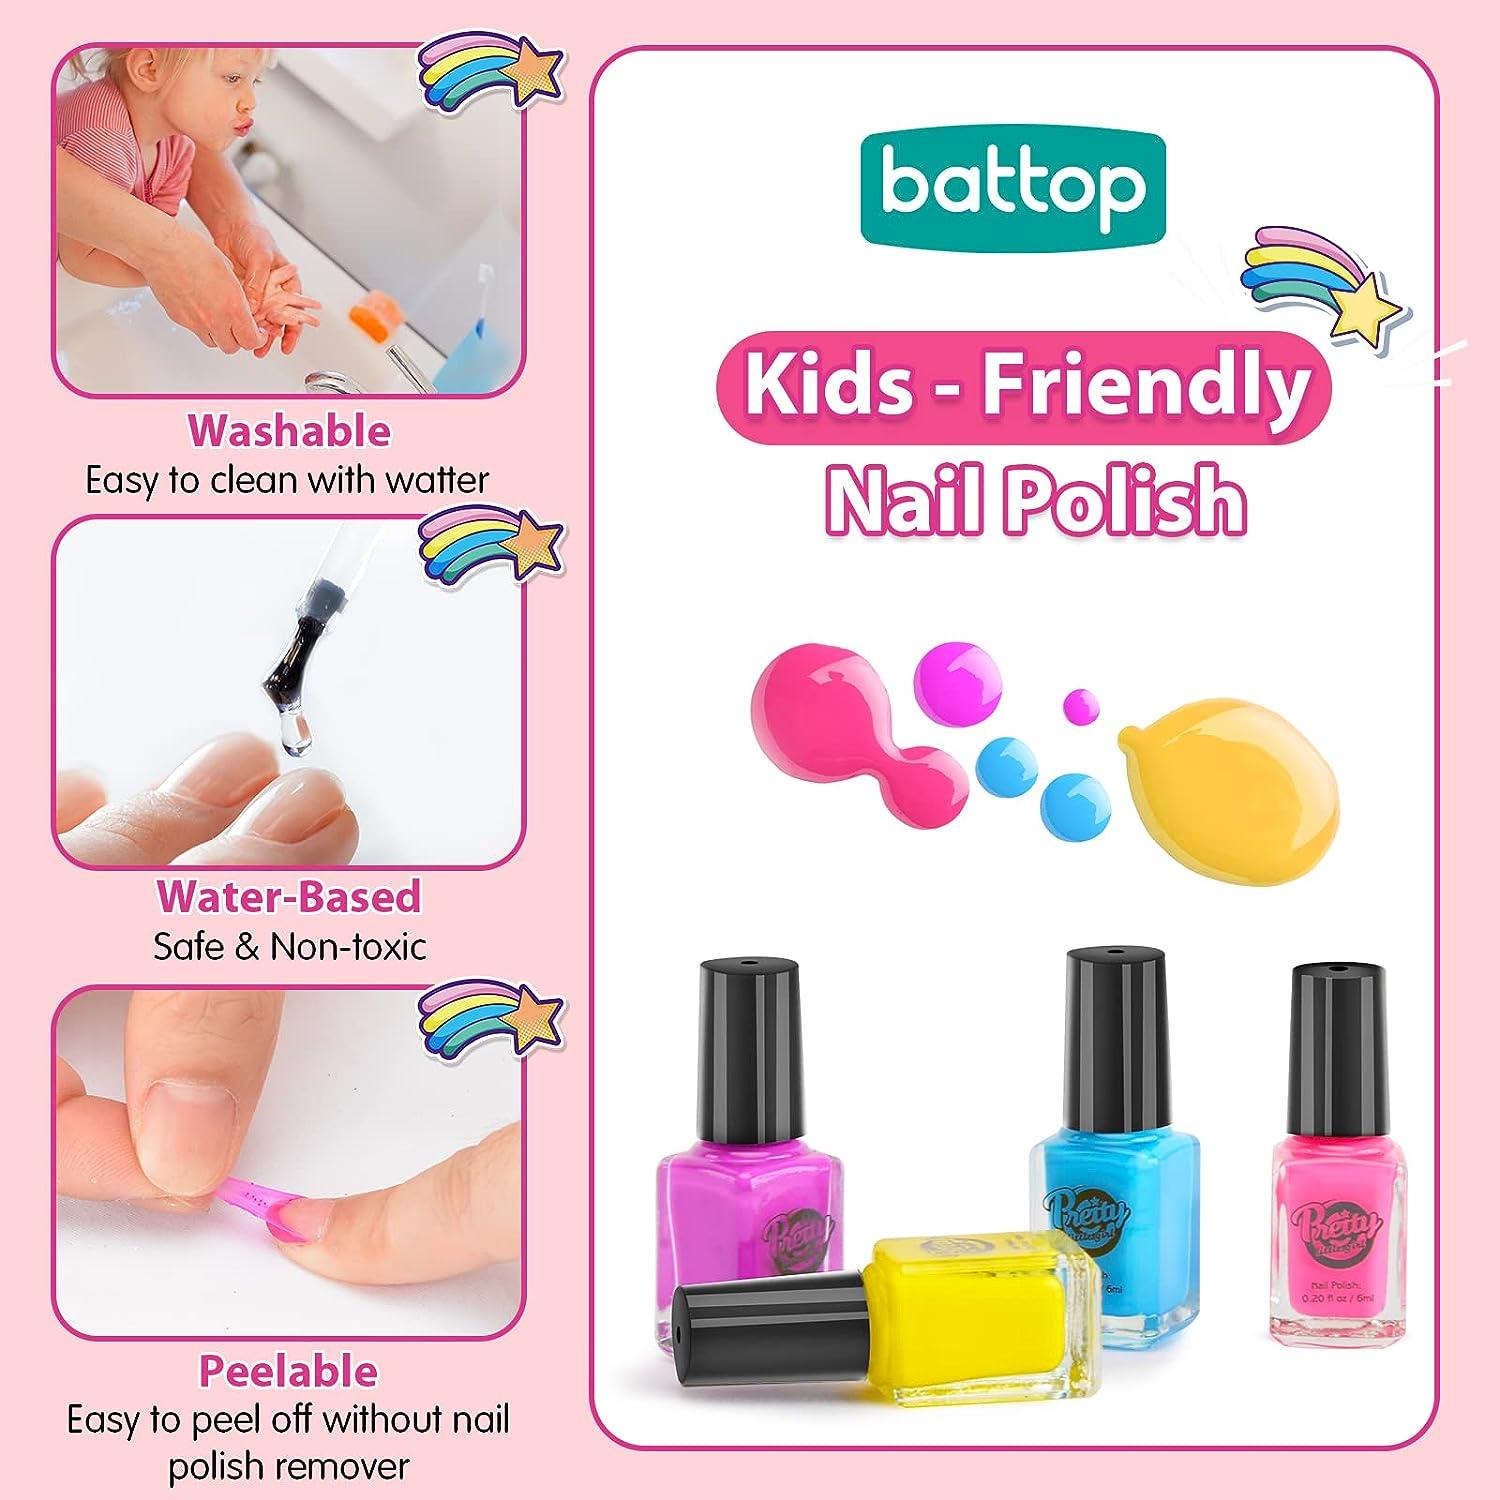 BATTOP Kids Nail Polish Set for Girls Nail Art Kits with Nail Dryer &  Glitter Pen Quick Dry & Peel Off & Non-Toxic Nail Polish Birthday Gifts for Girls  Ages 8-12